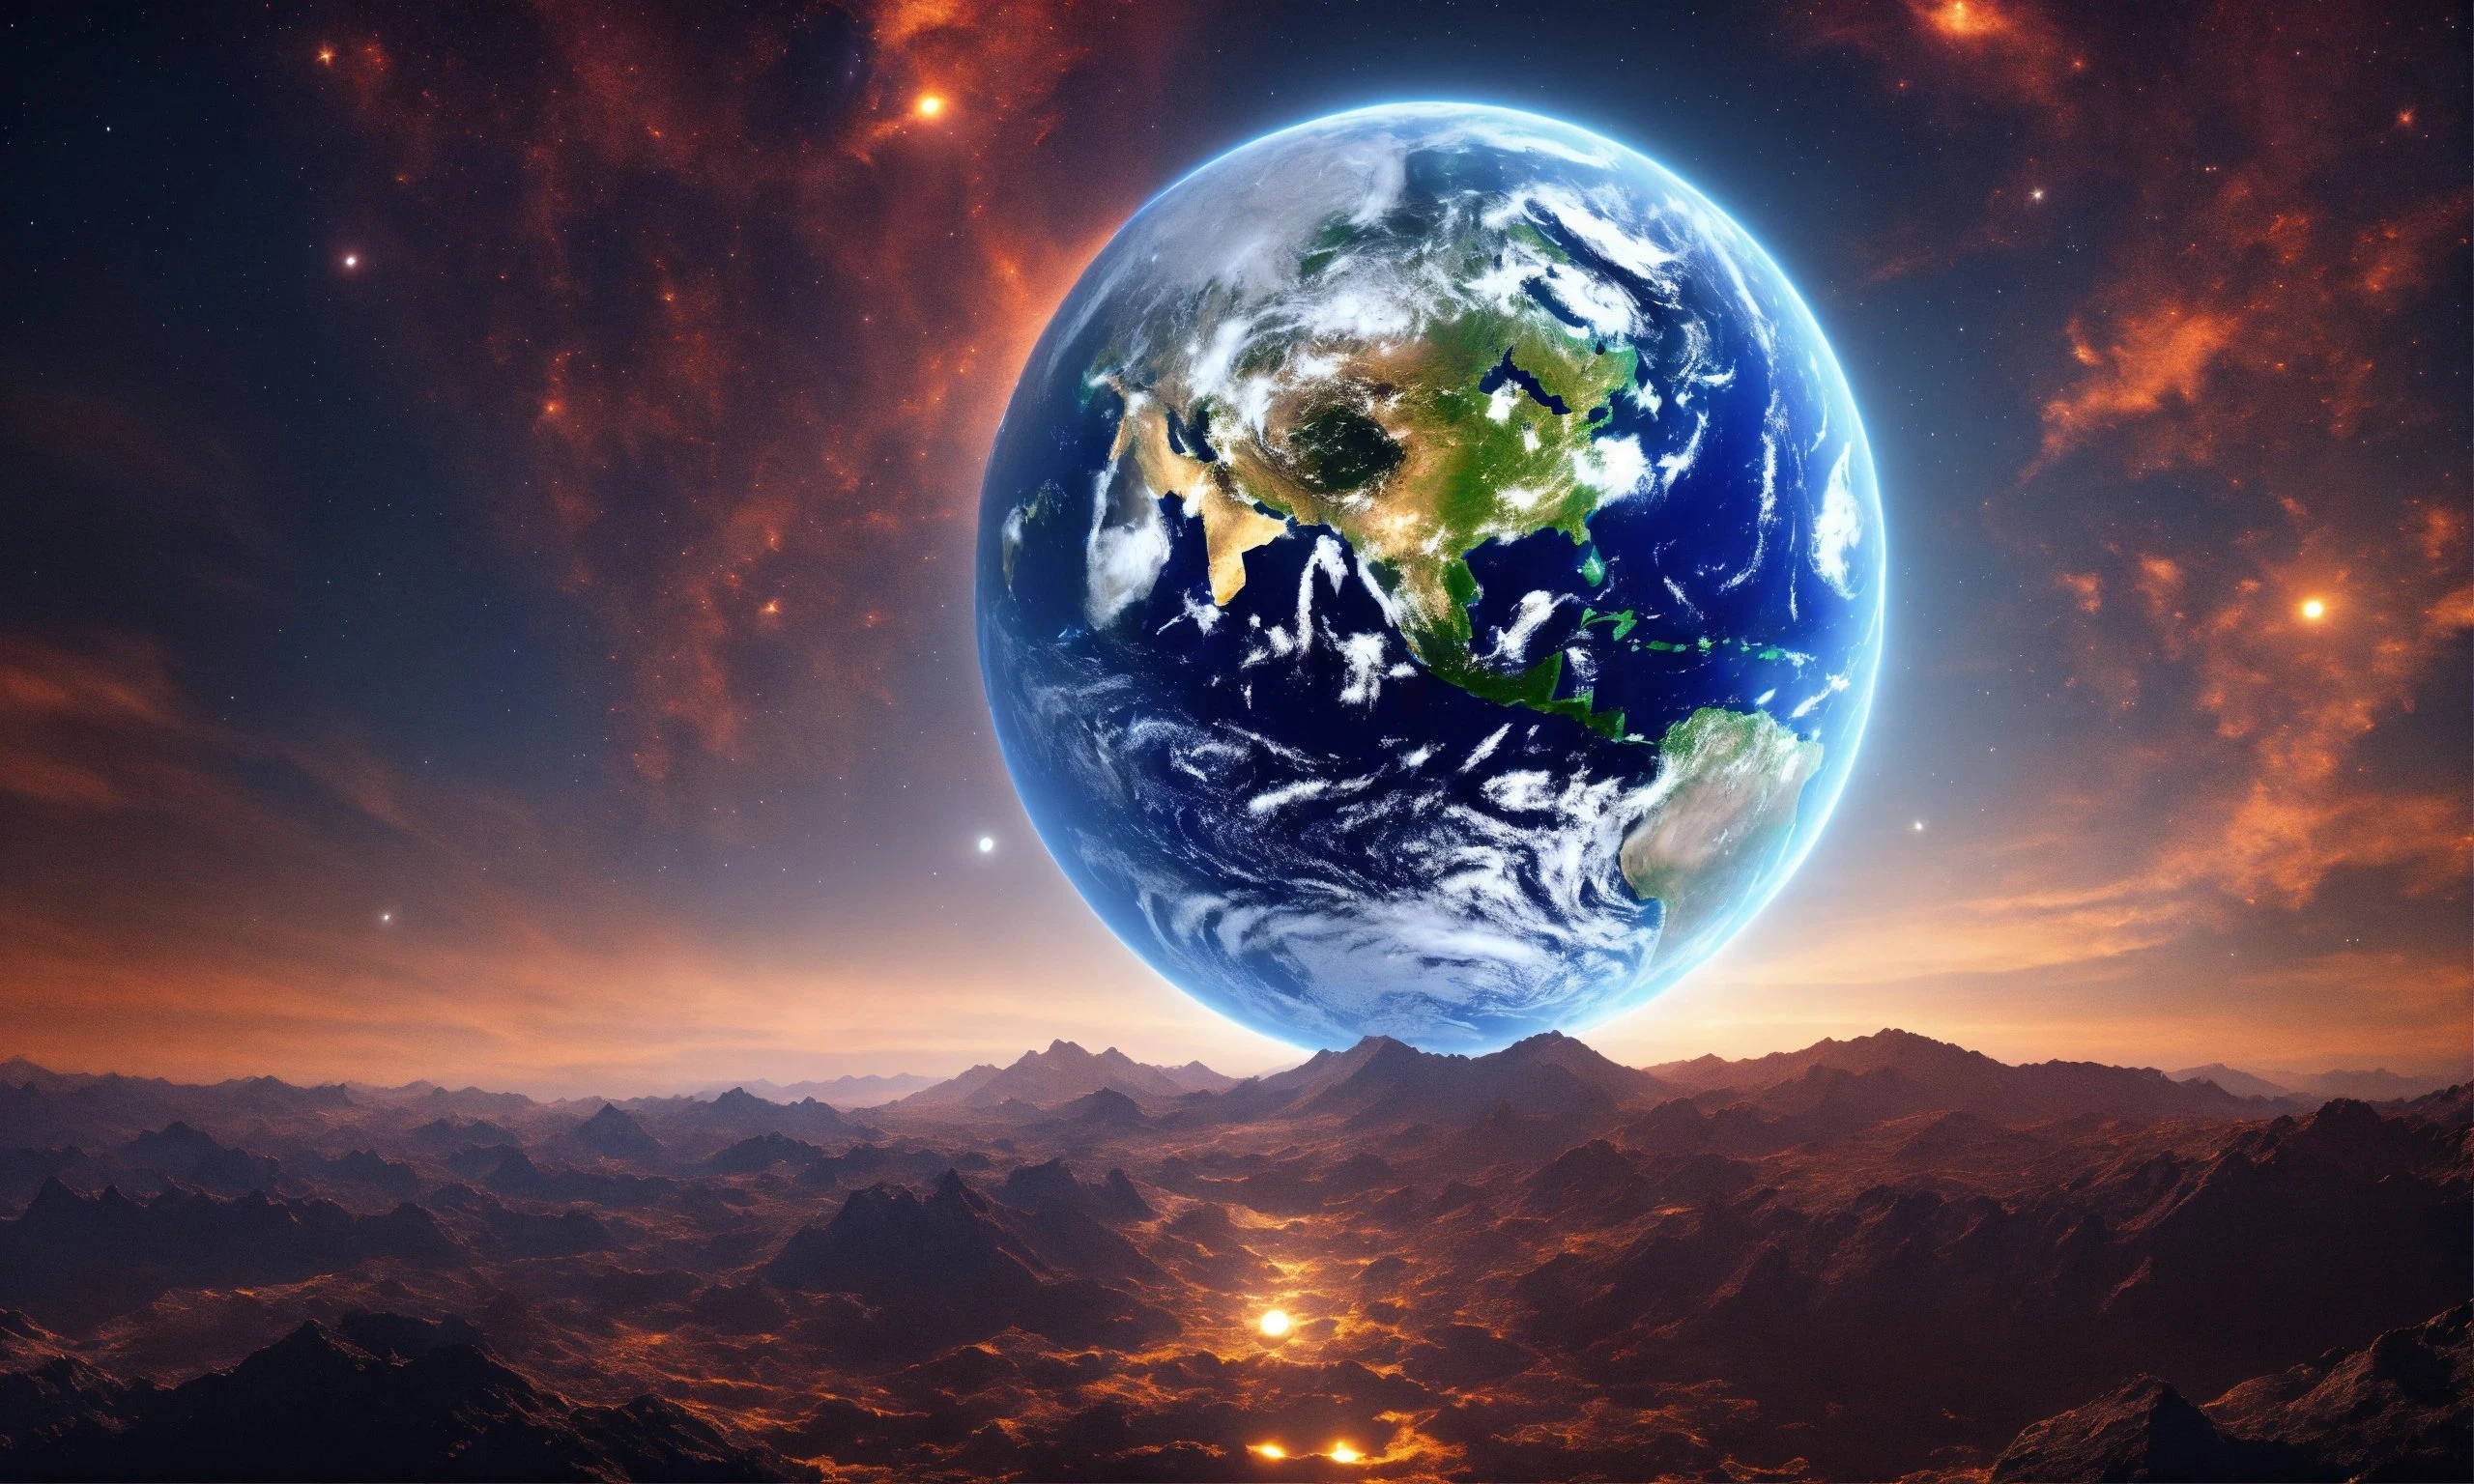 50 Interesting Facts About Earth to Remind You Why It's Amazing